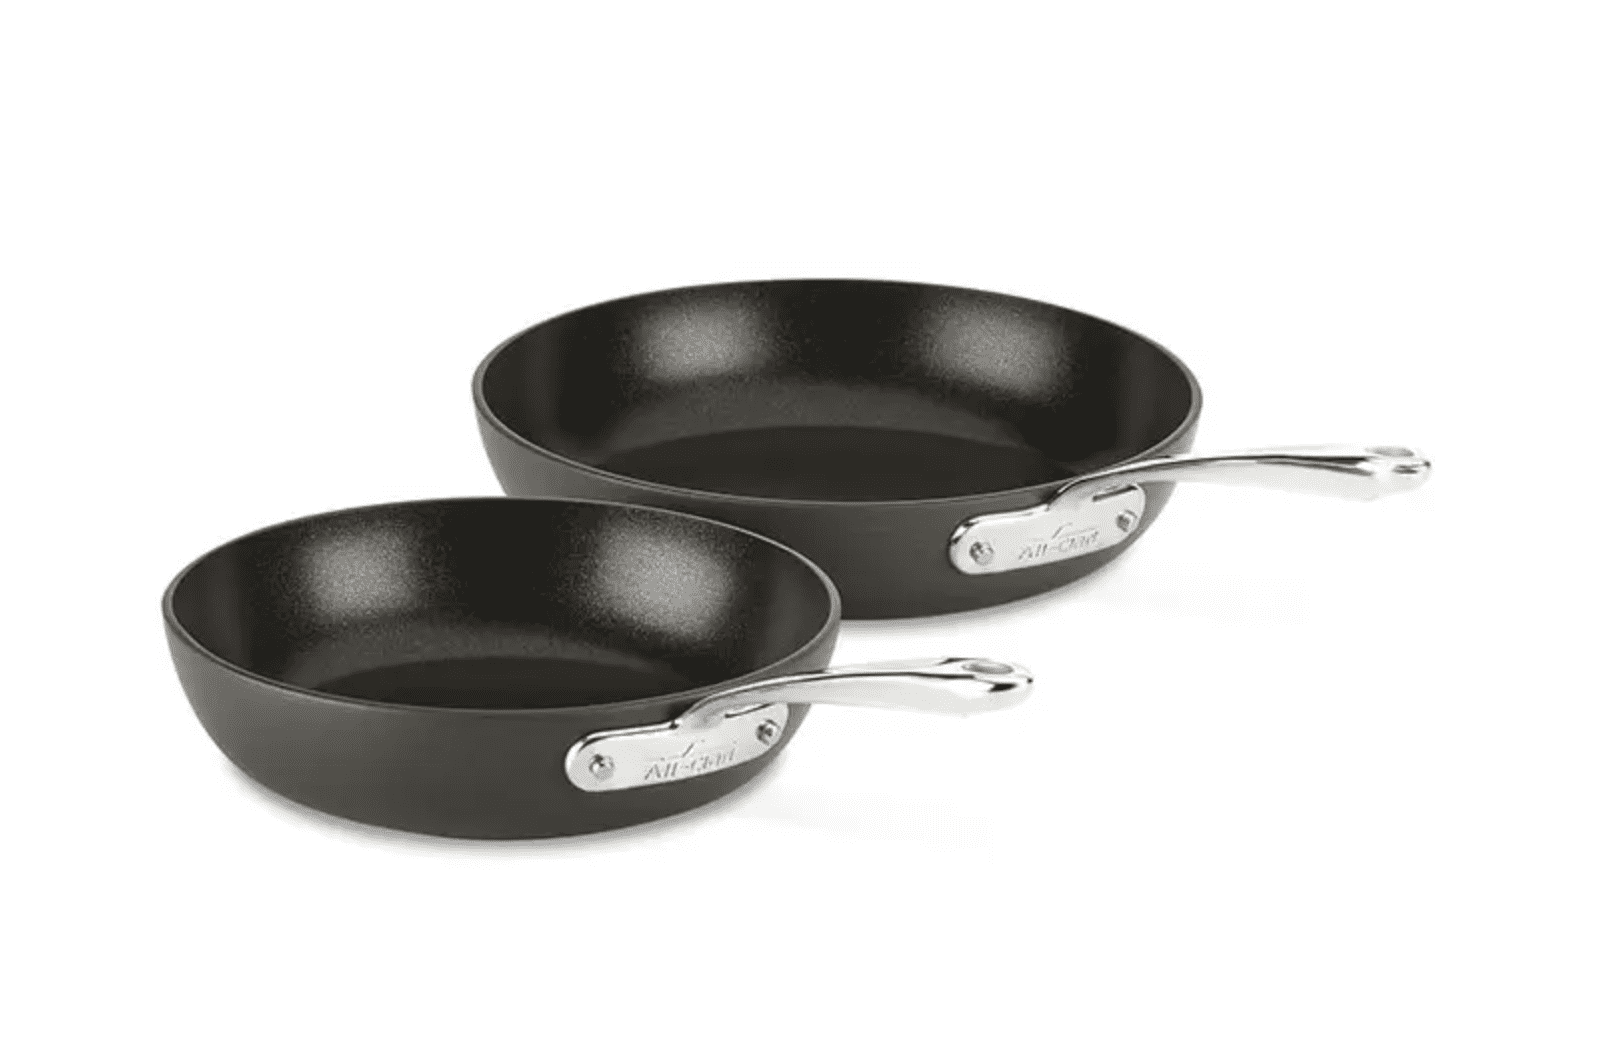 http://cdn.apartmenttherapy.info/image/upload/v1665428040/gen-workflow/product-database/All_Clad_hard_Anodized_Fry_Pan_Set.png